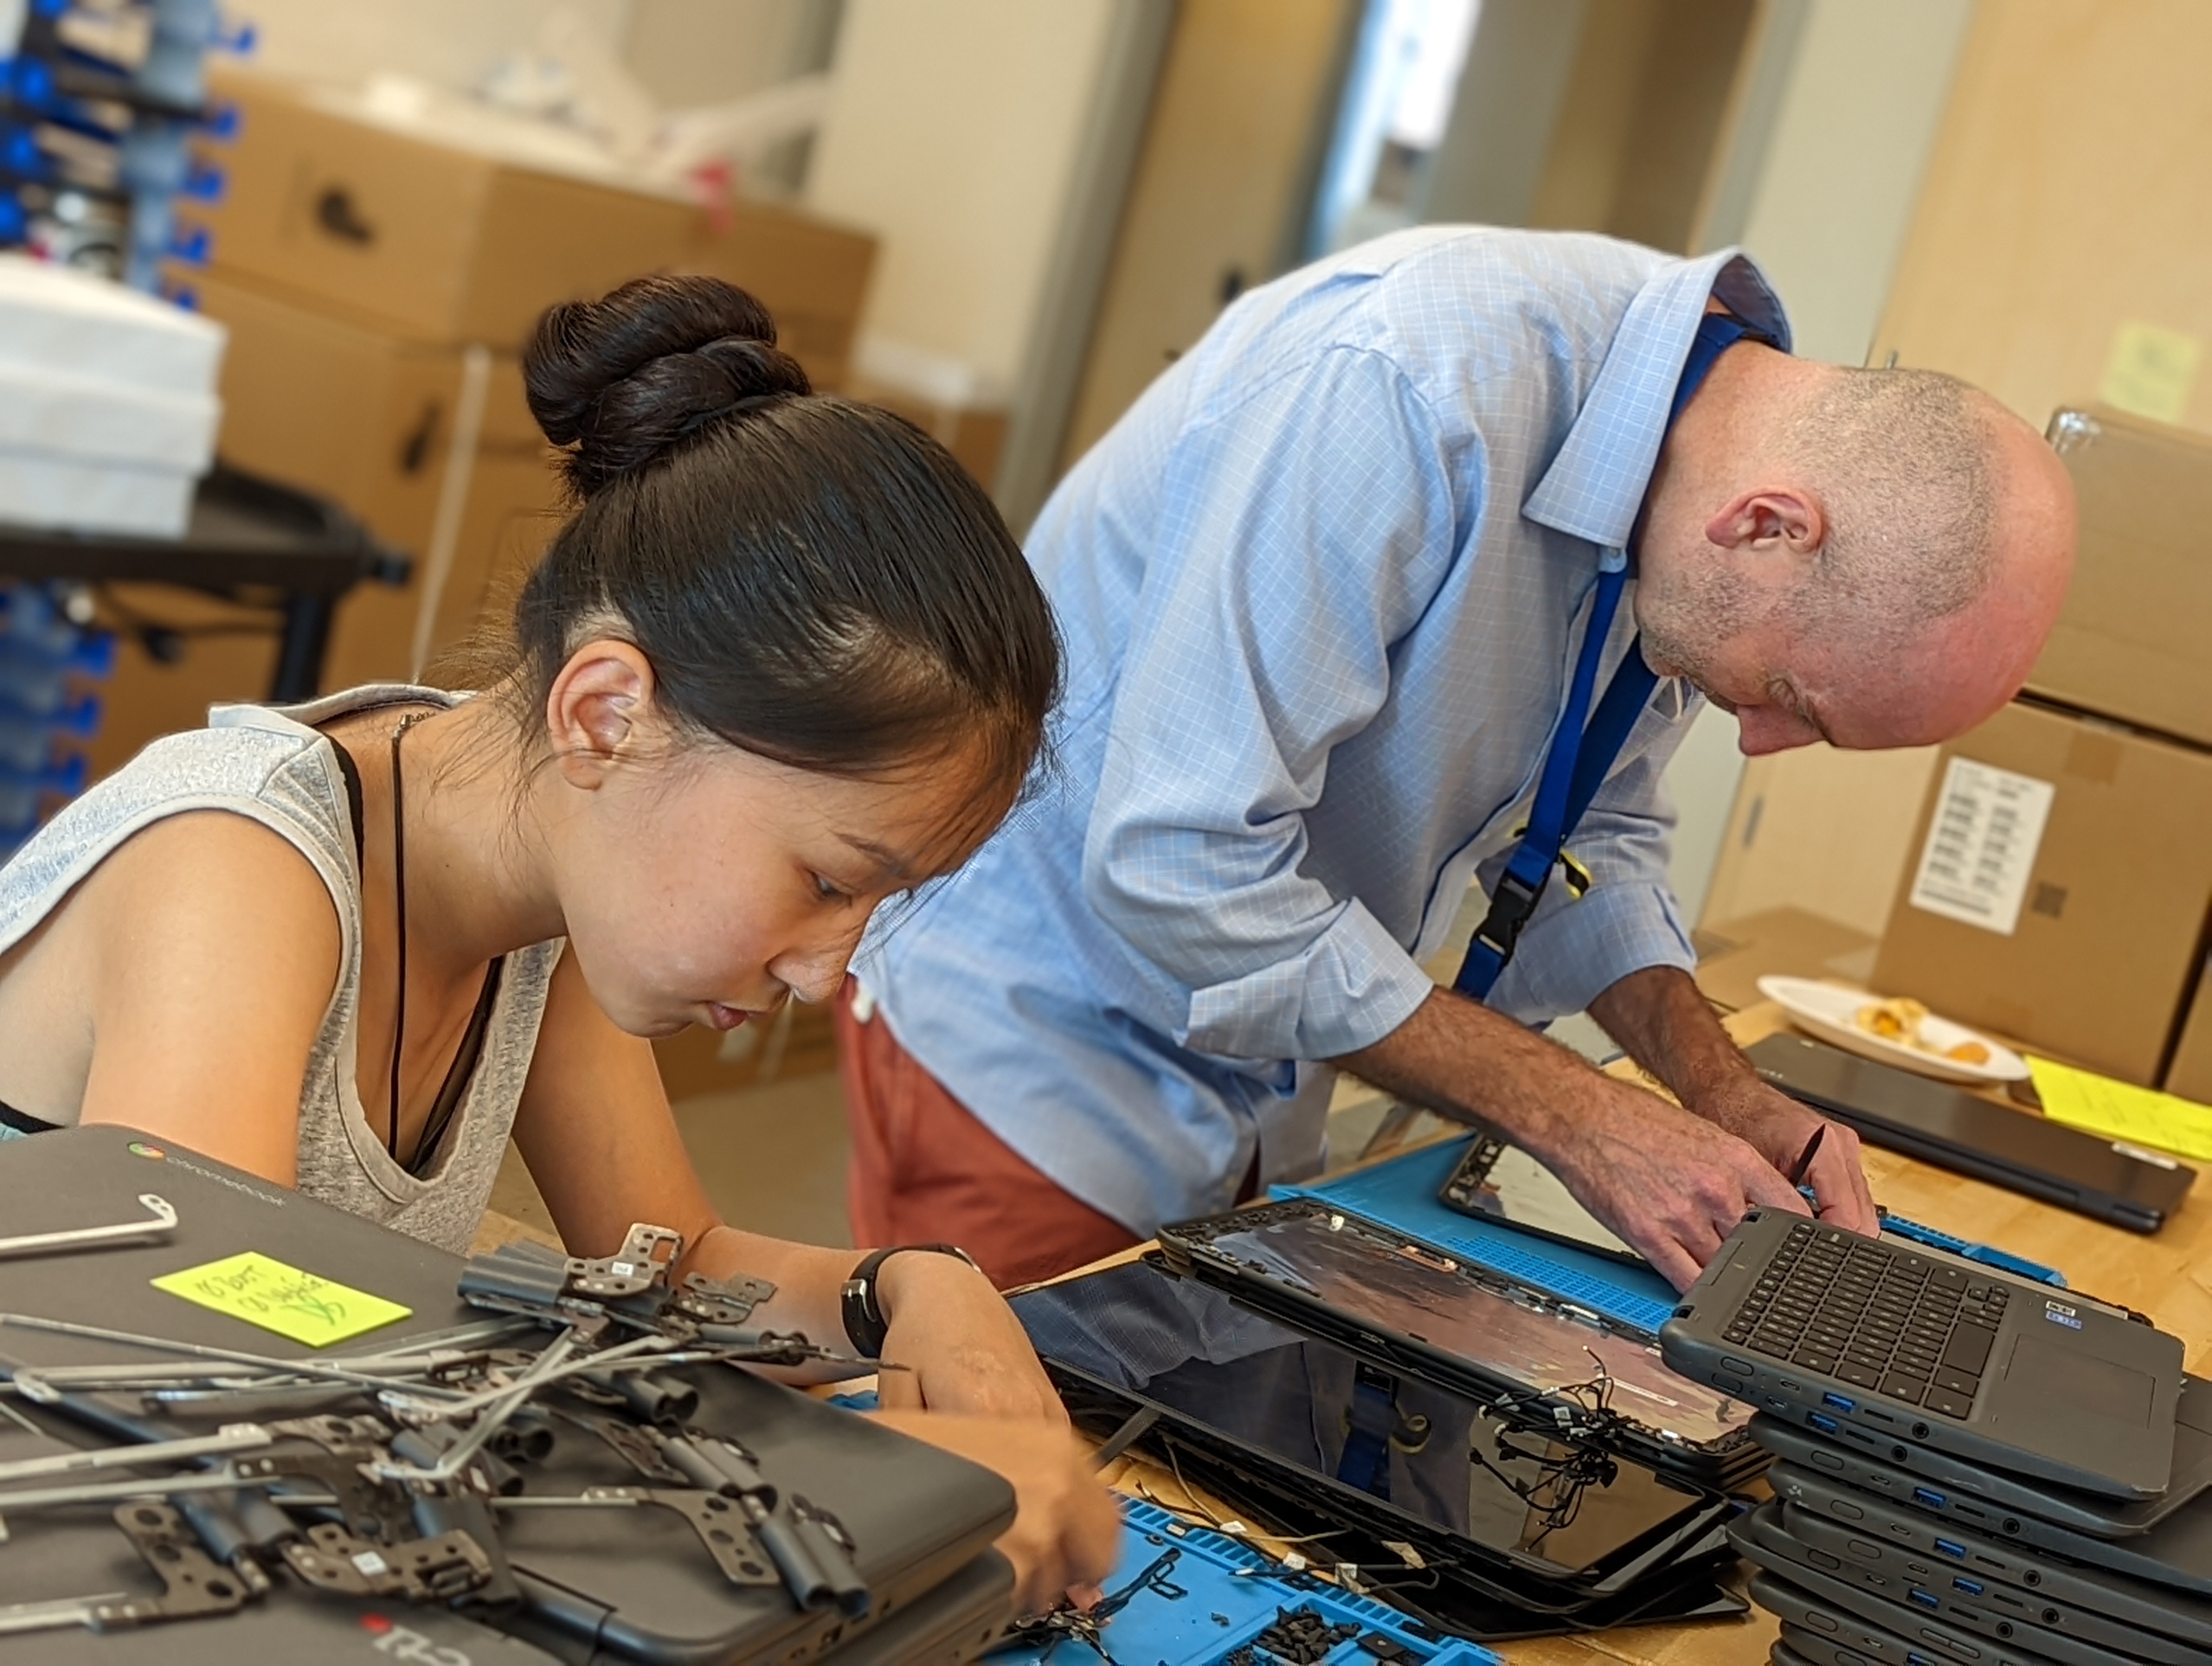 A female student and male employee are pictured repairing chromebook computers.